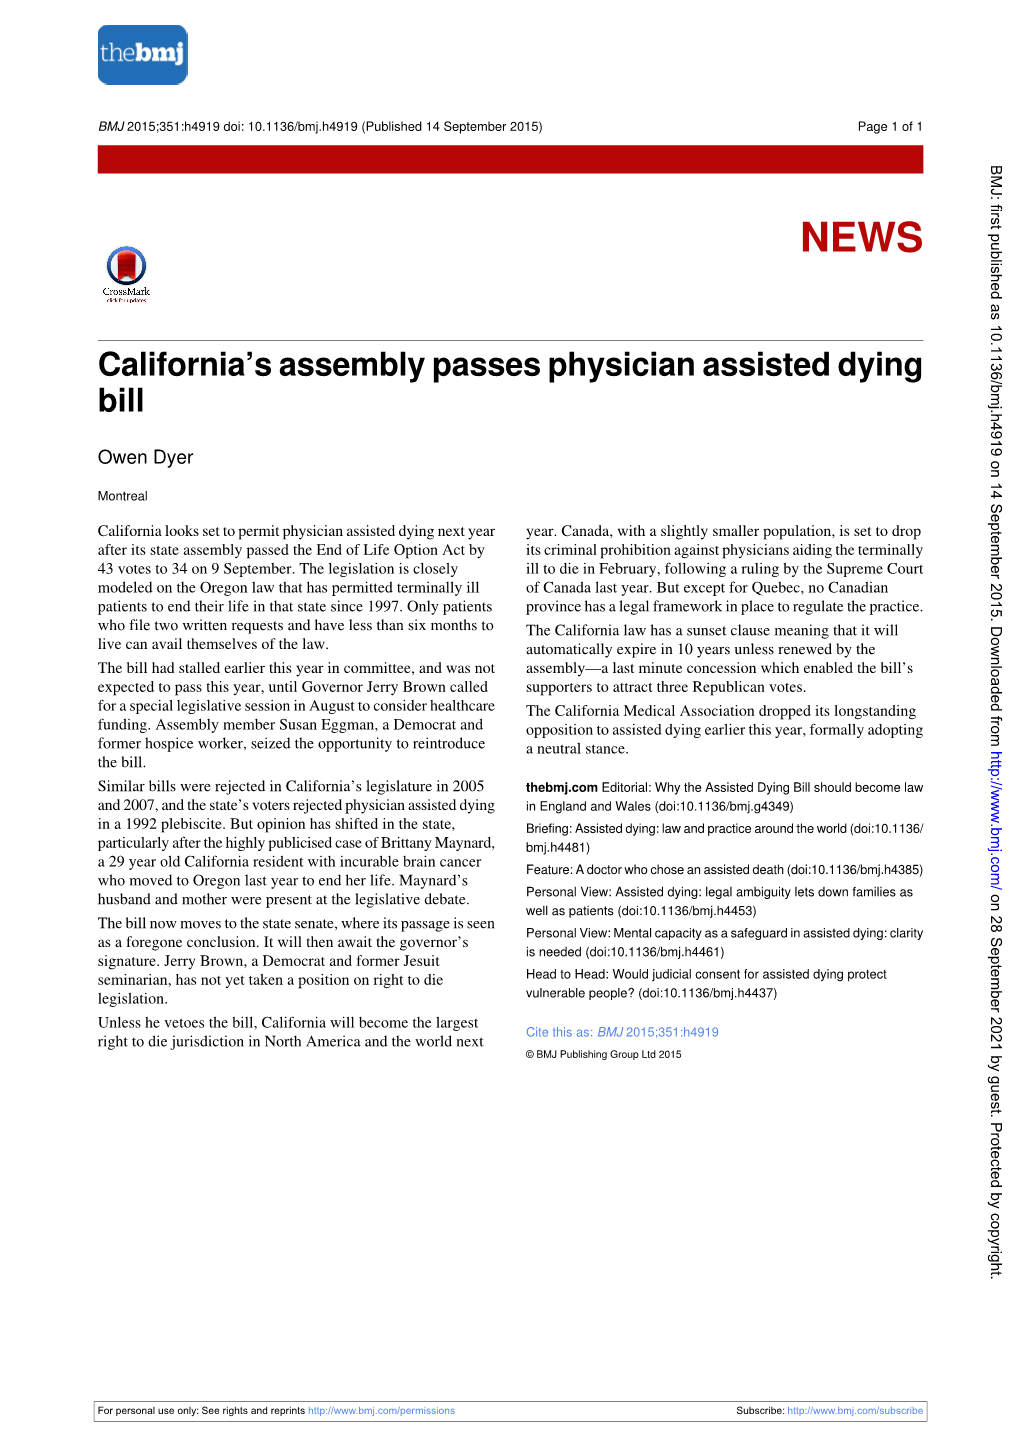 California's Assembly Passes Physician Assisted Dying Bill